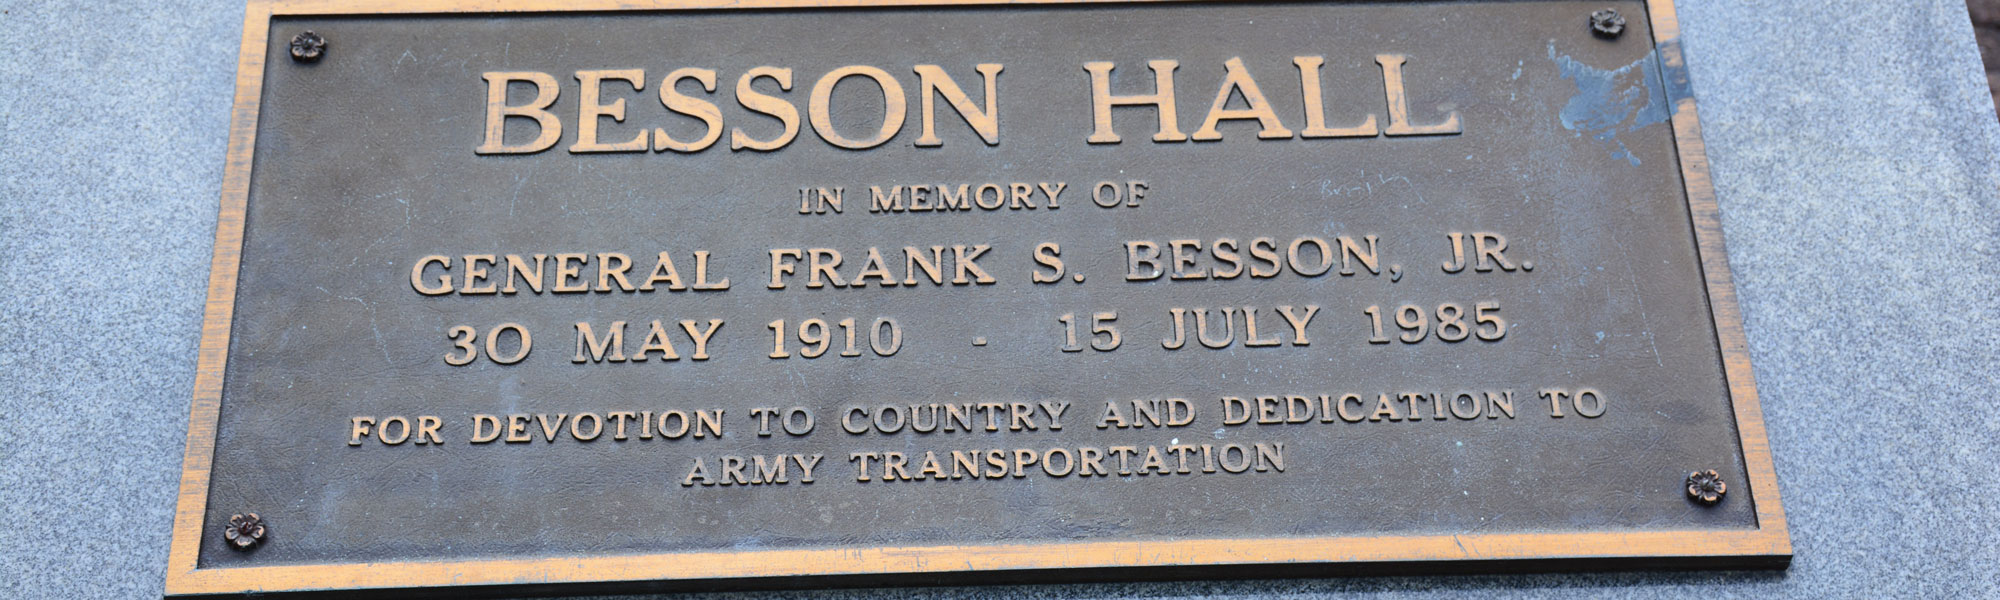 A memorial to General Frank S. Besson, Jr.